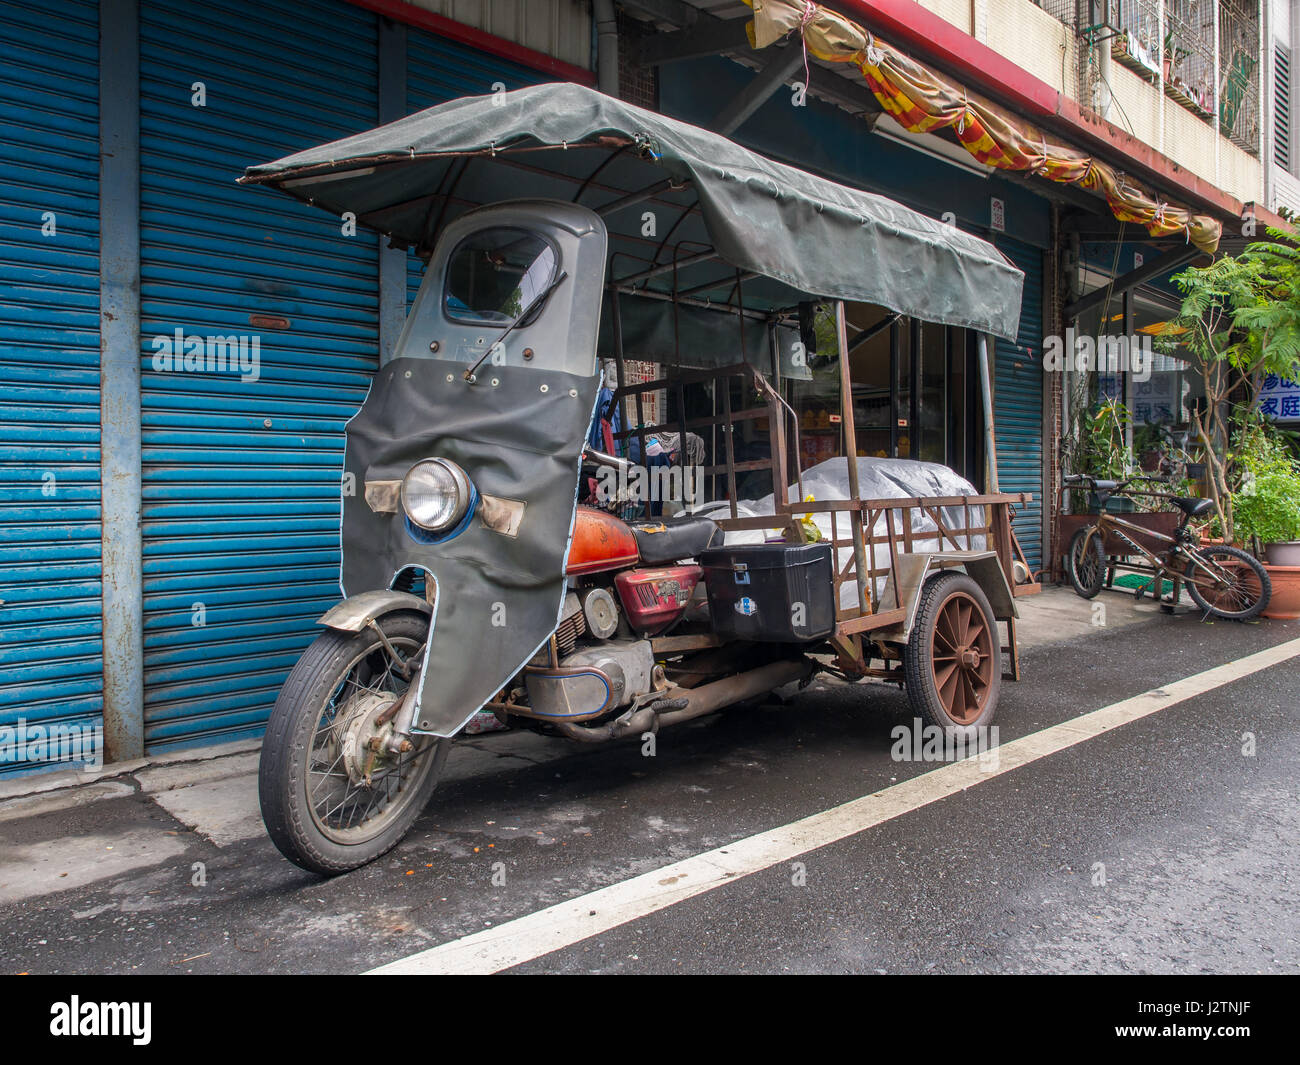 Taipei, Taiwan - October 16, 2016: A Motorbike  with a large trunk for transporting goods Stock Photo